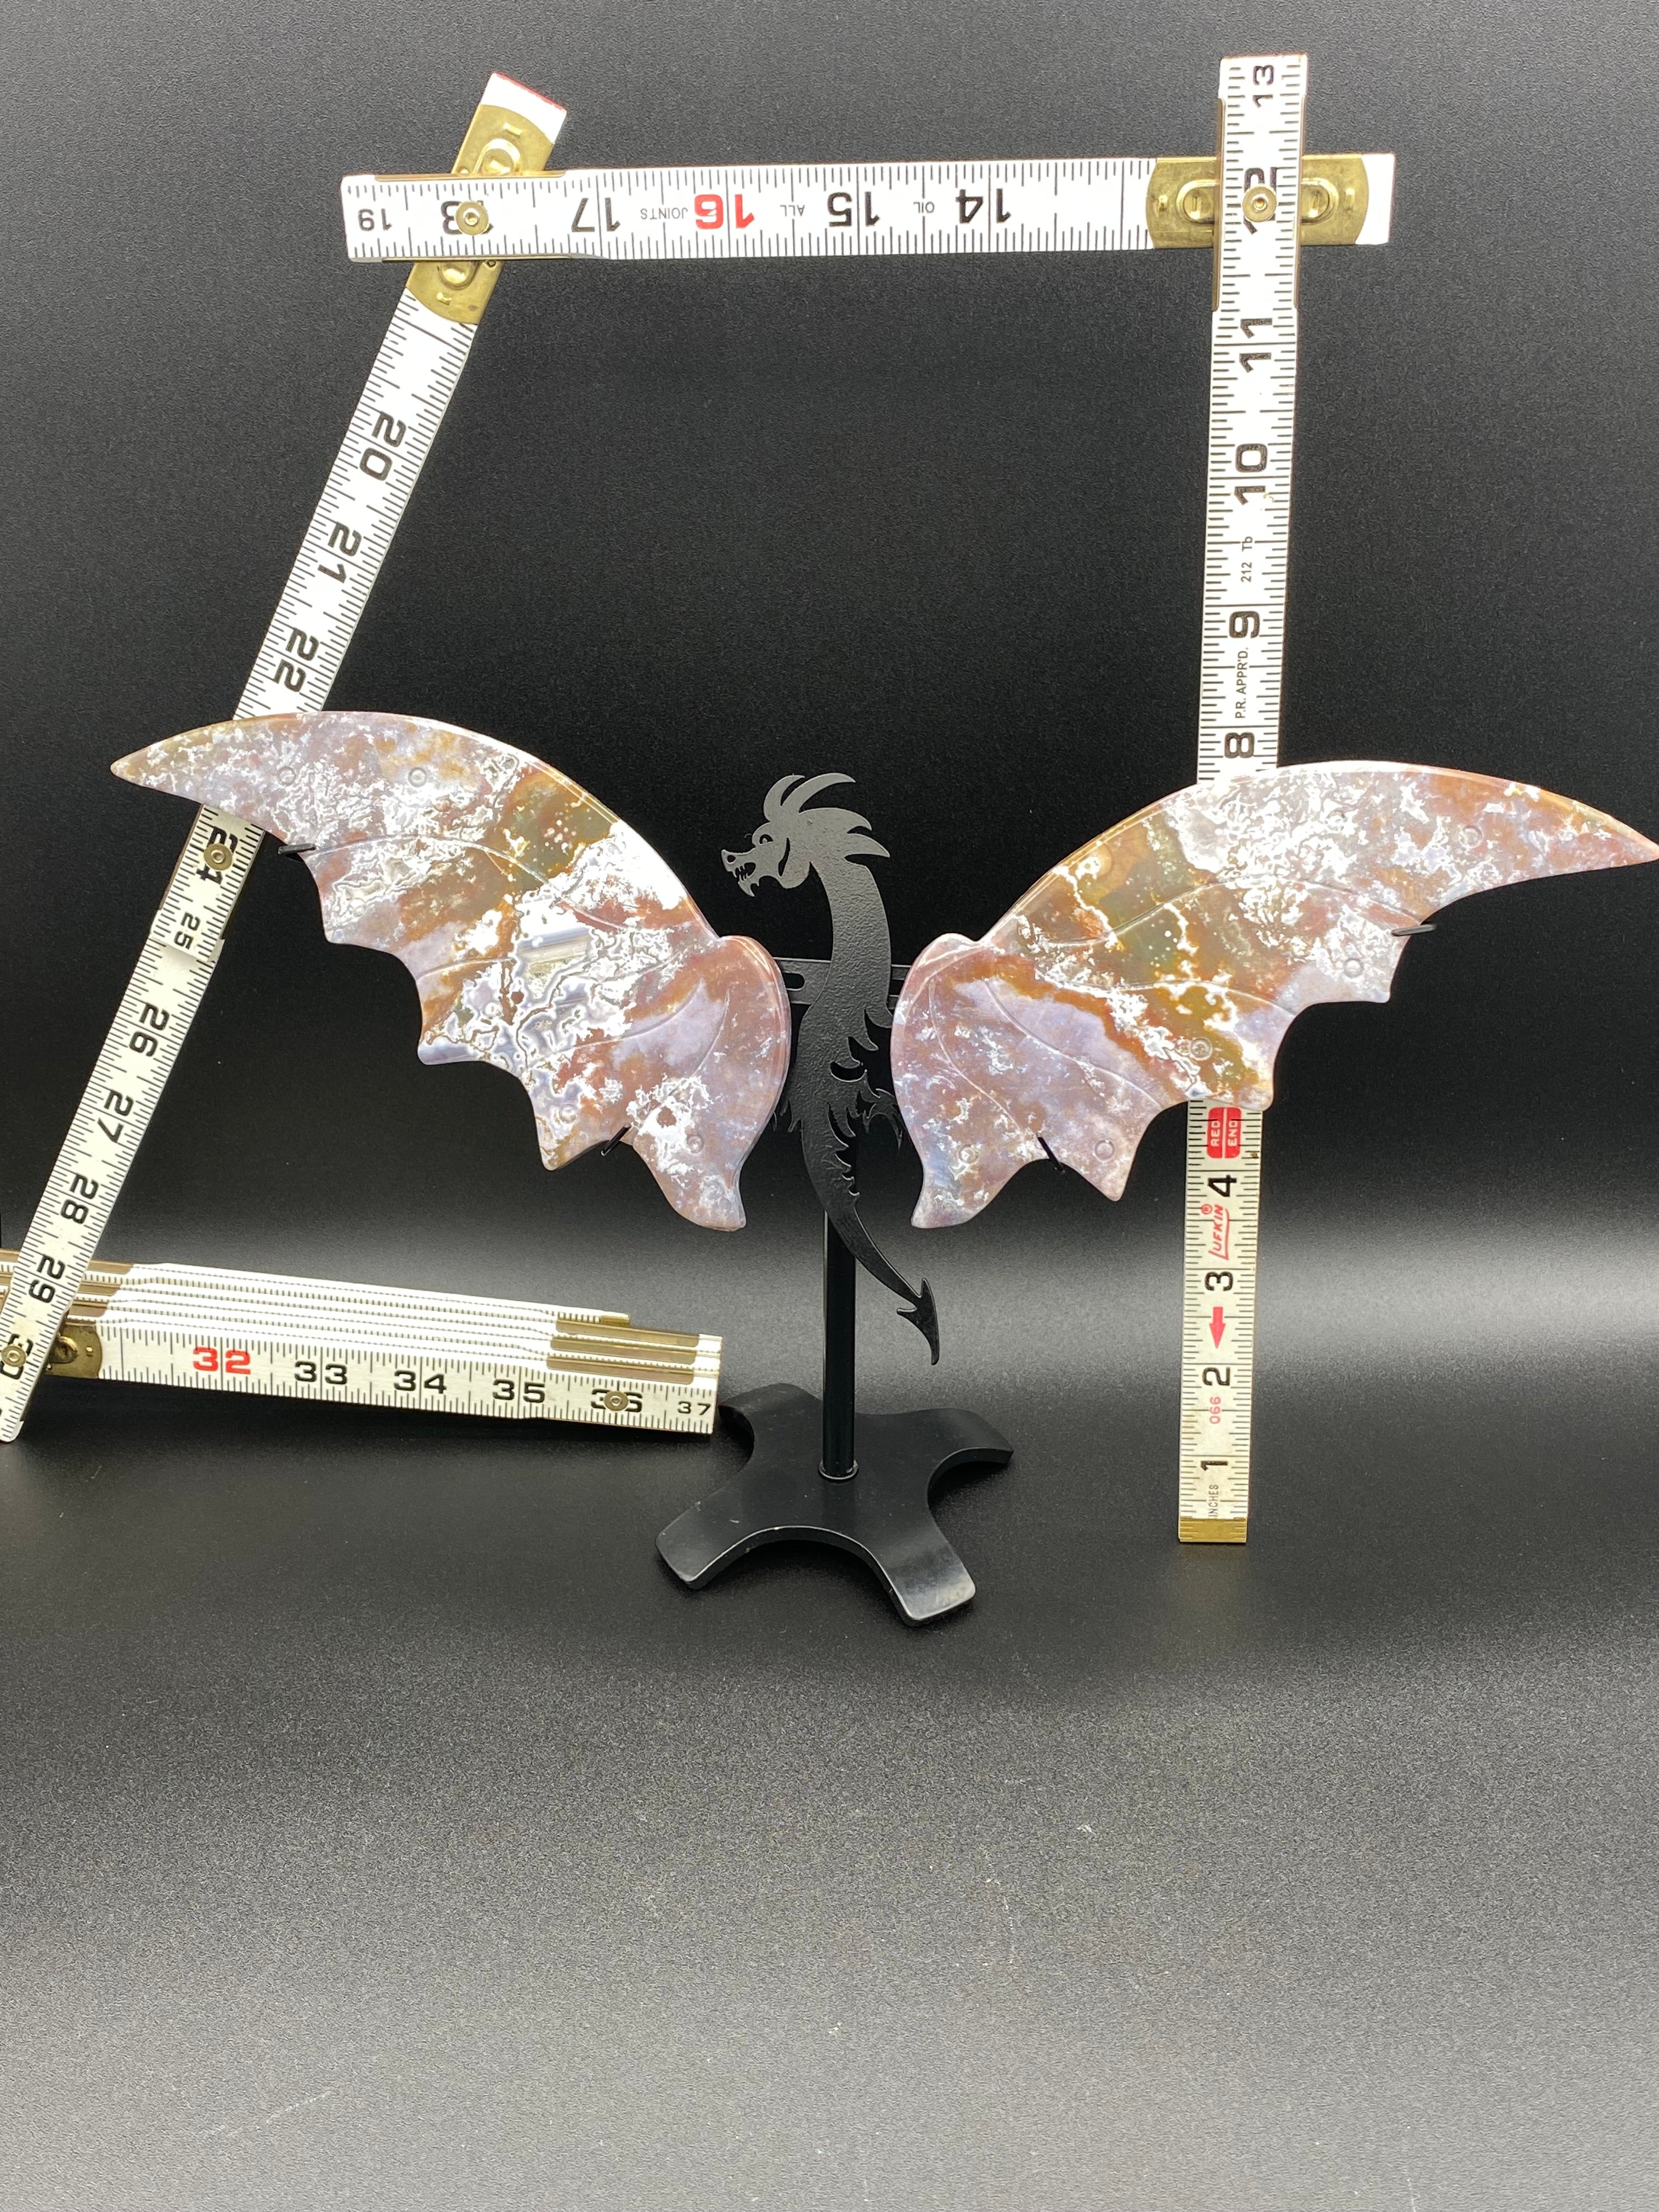 Ocean Jasper Dragon Wings with Stand                 (A)